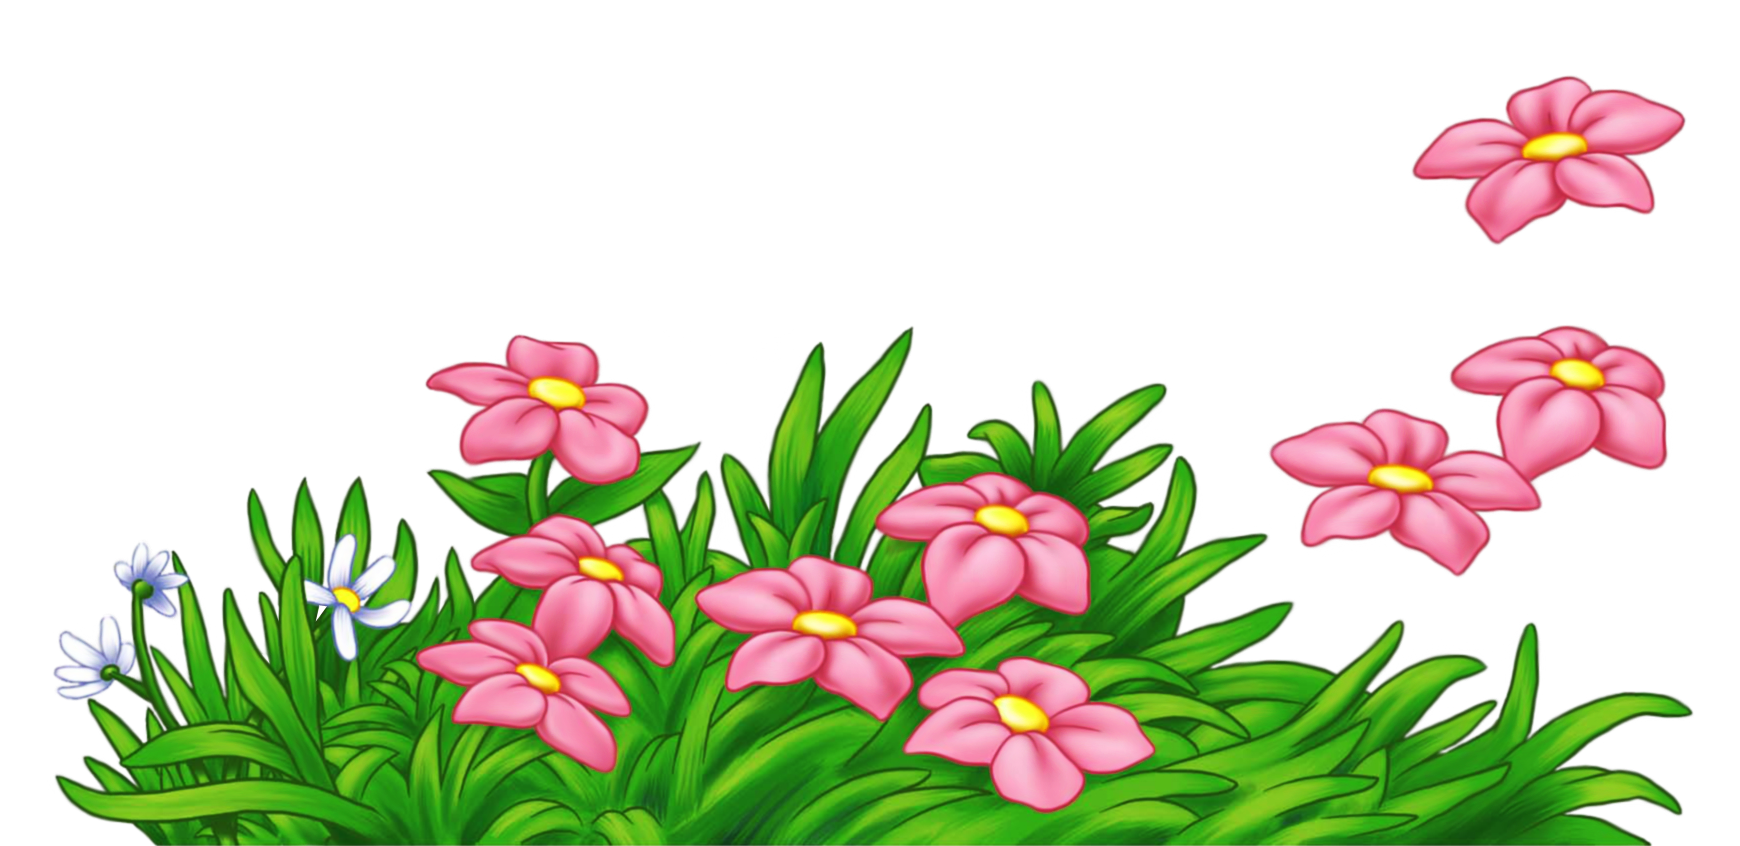 With pink flowers png. Grass clipart cute